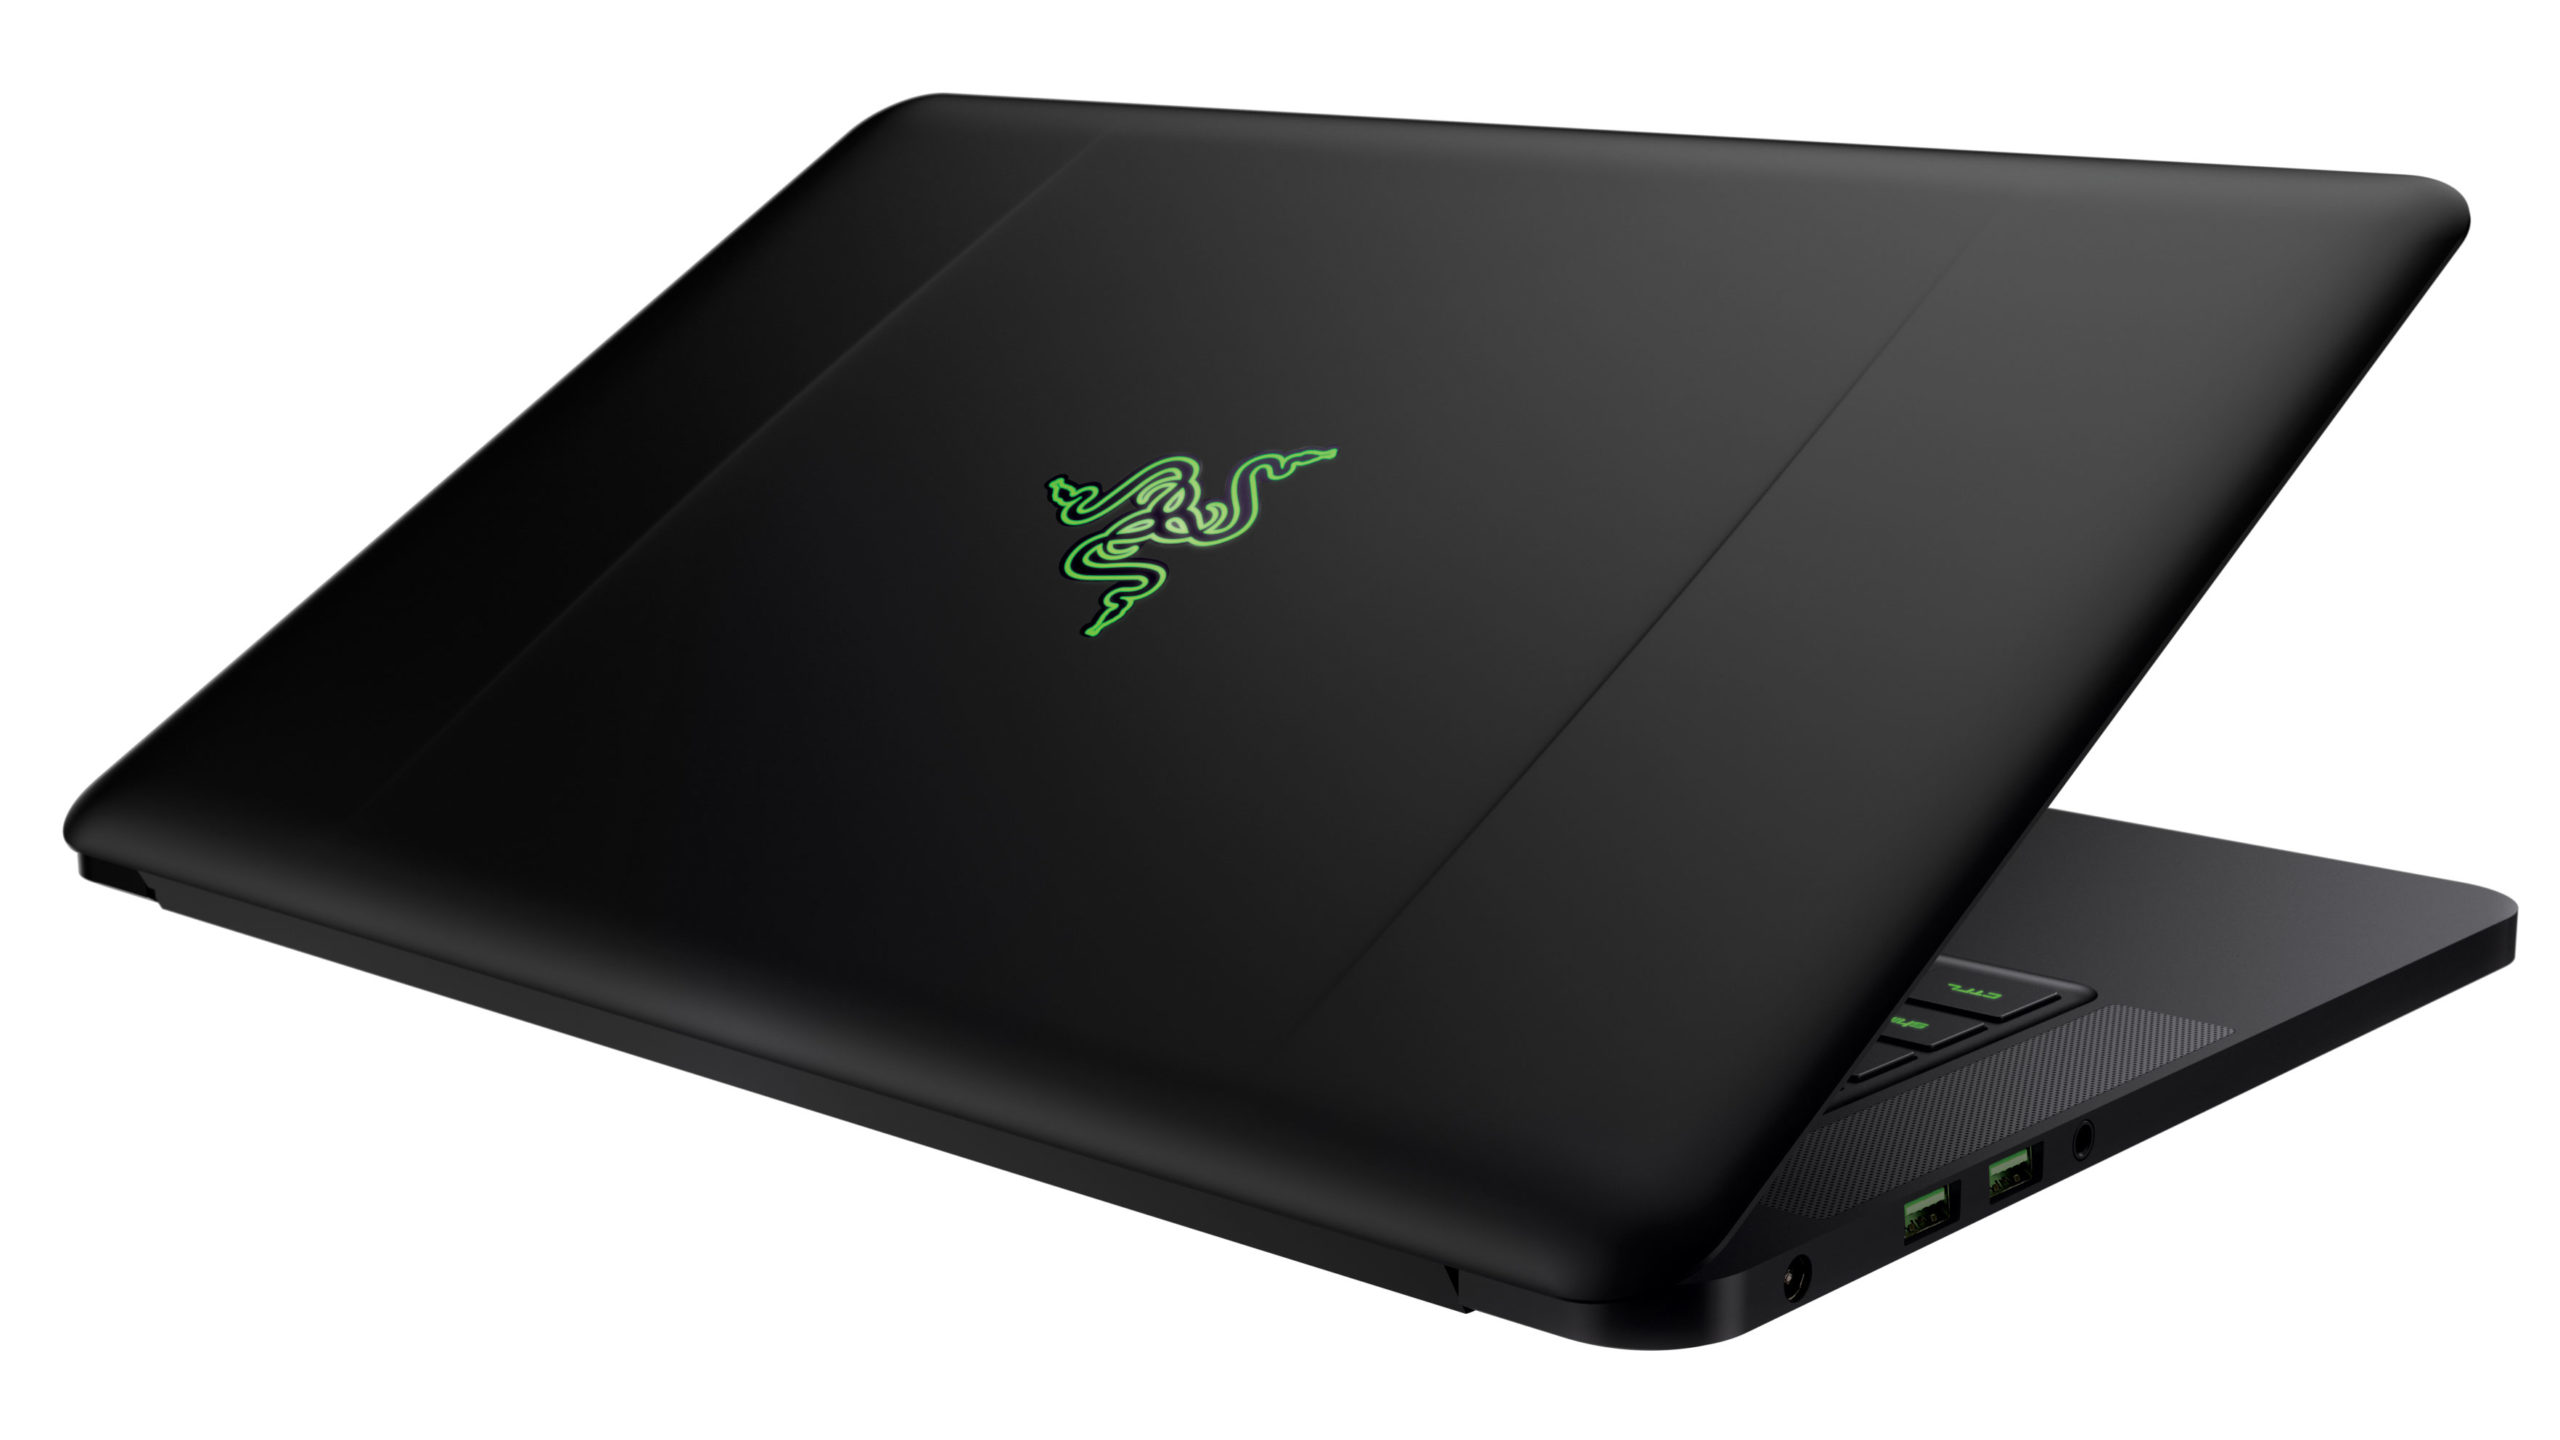 The New Razer Blade Might Be The Gaming Laptop We’ve Been Waiting For